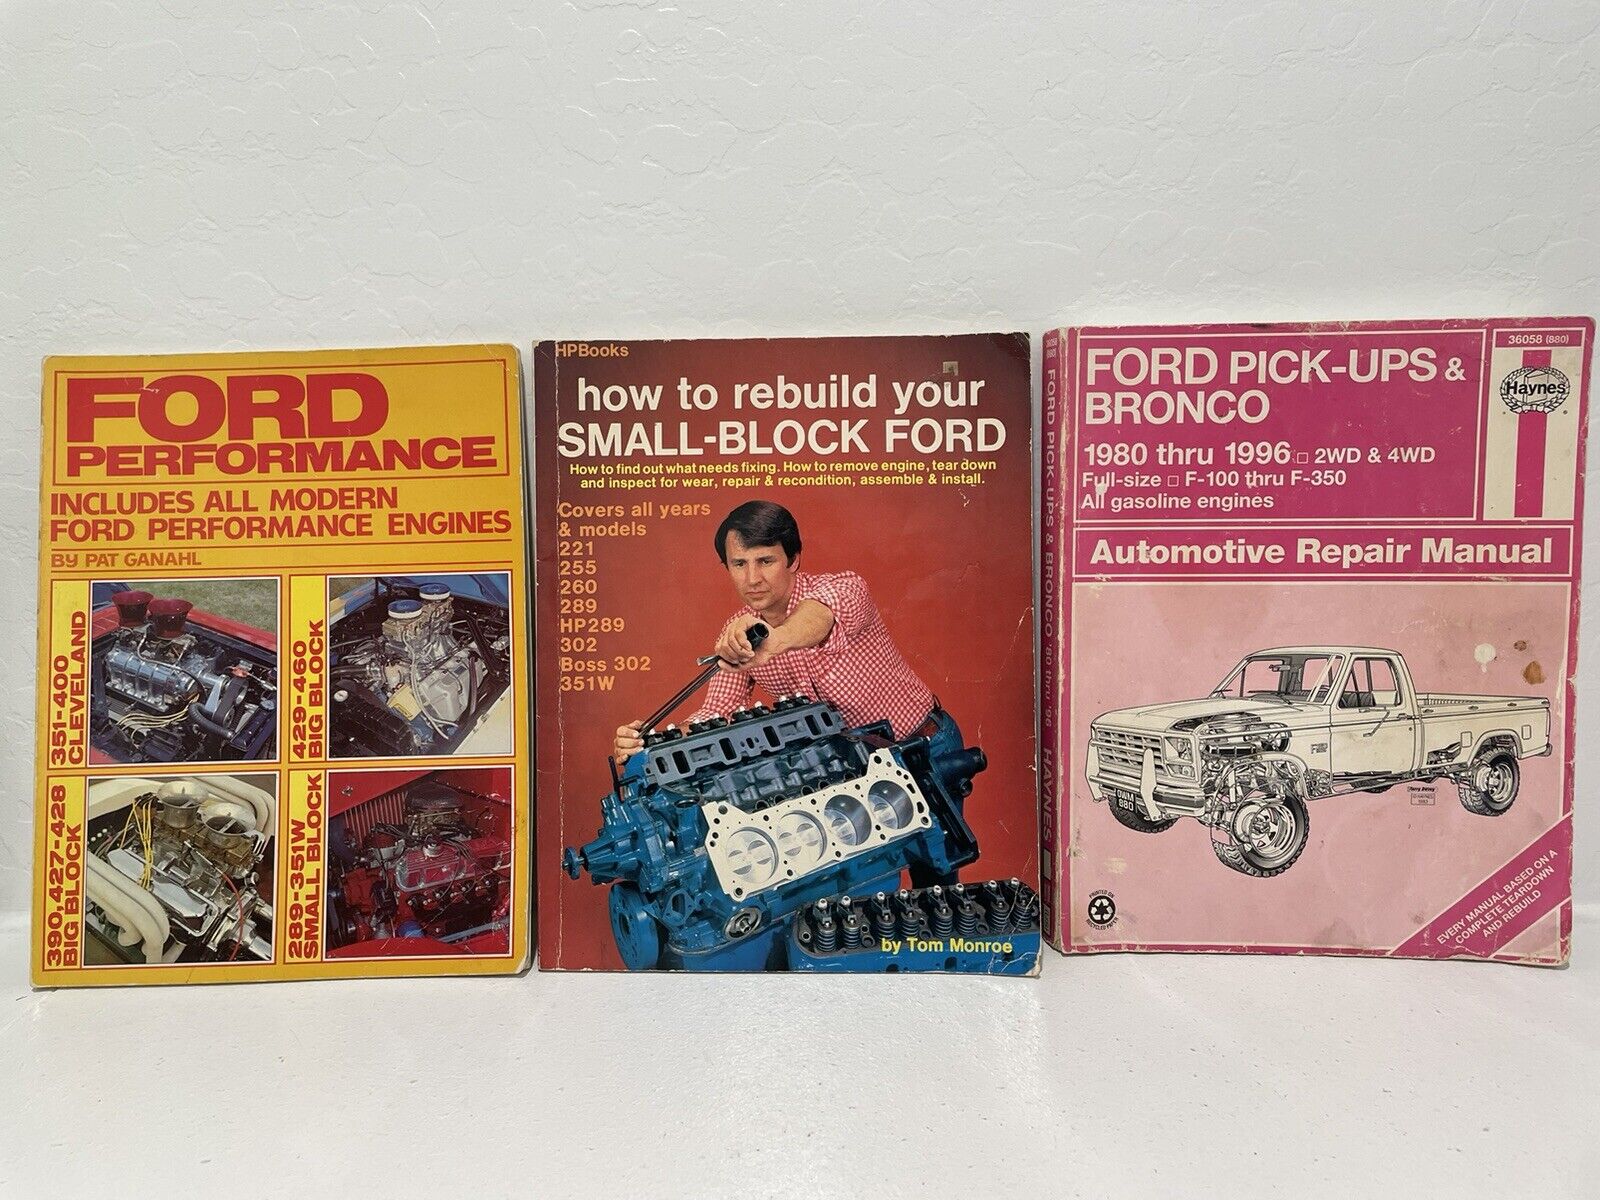 How to rebuild your small block Ford - HP Books 89, Ford Car Service Manual Lot 